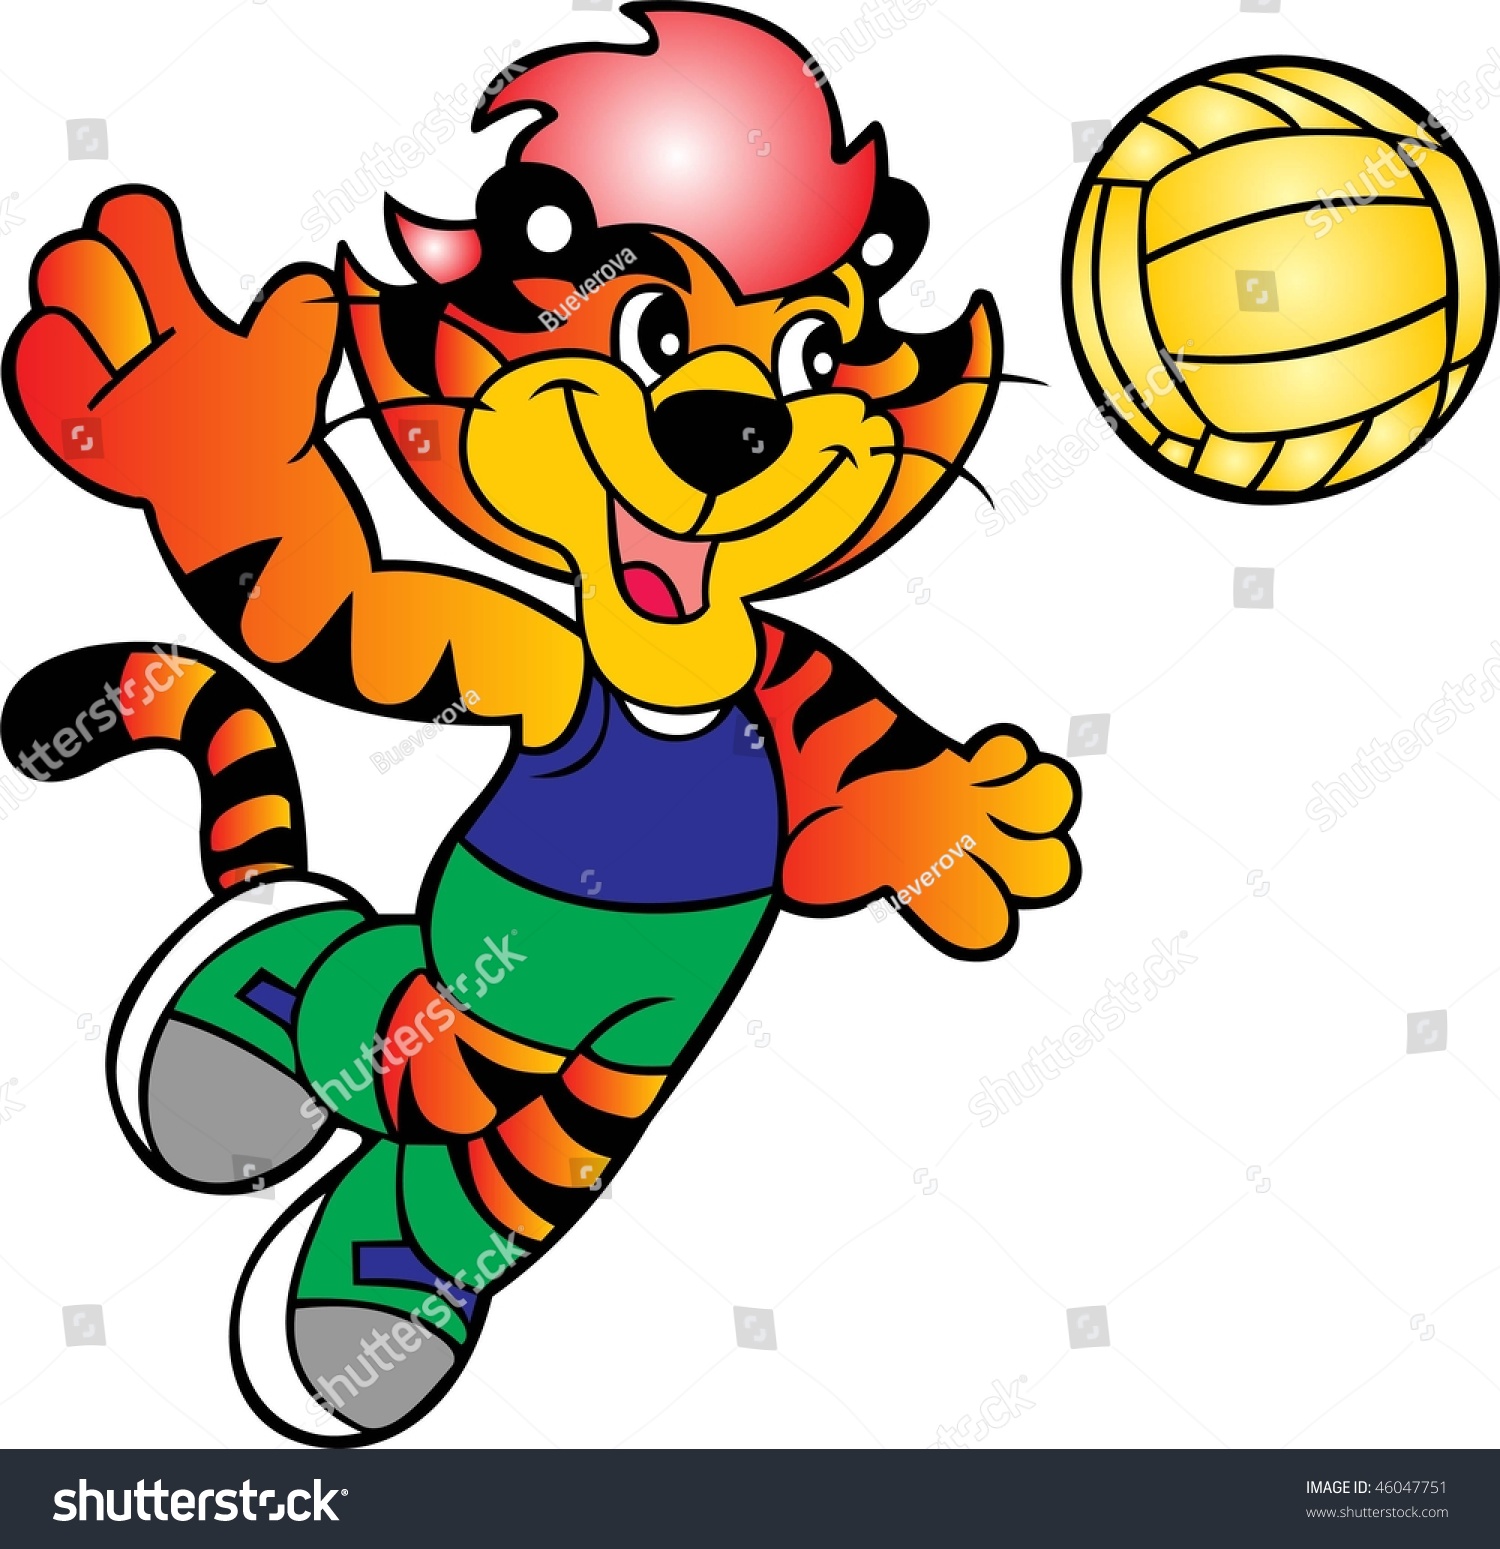 tiger volleyball clipart - photo #7